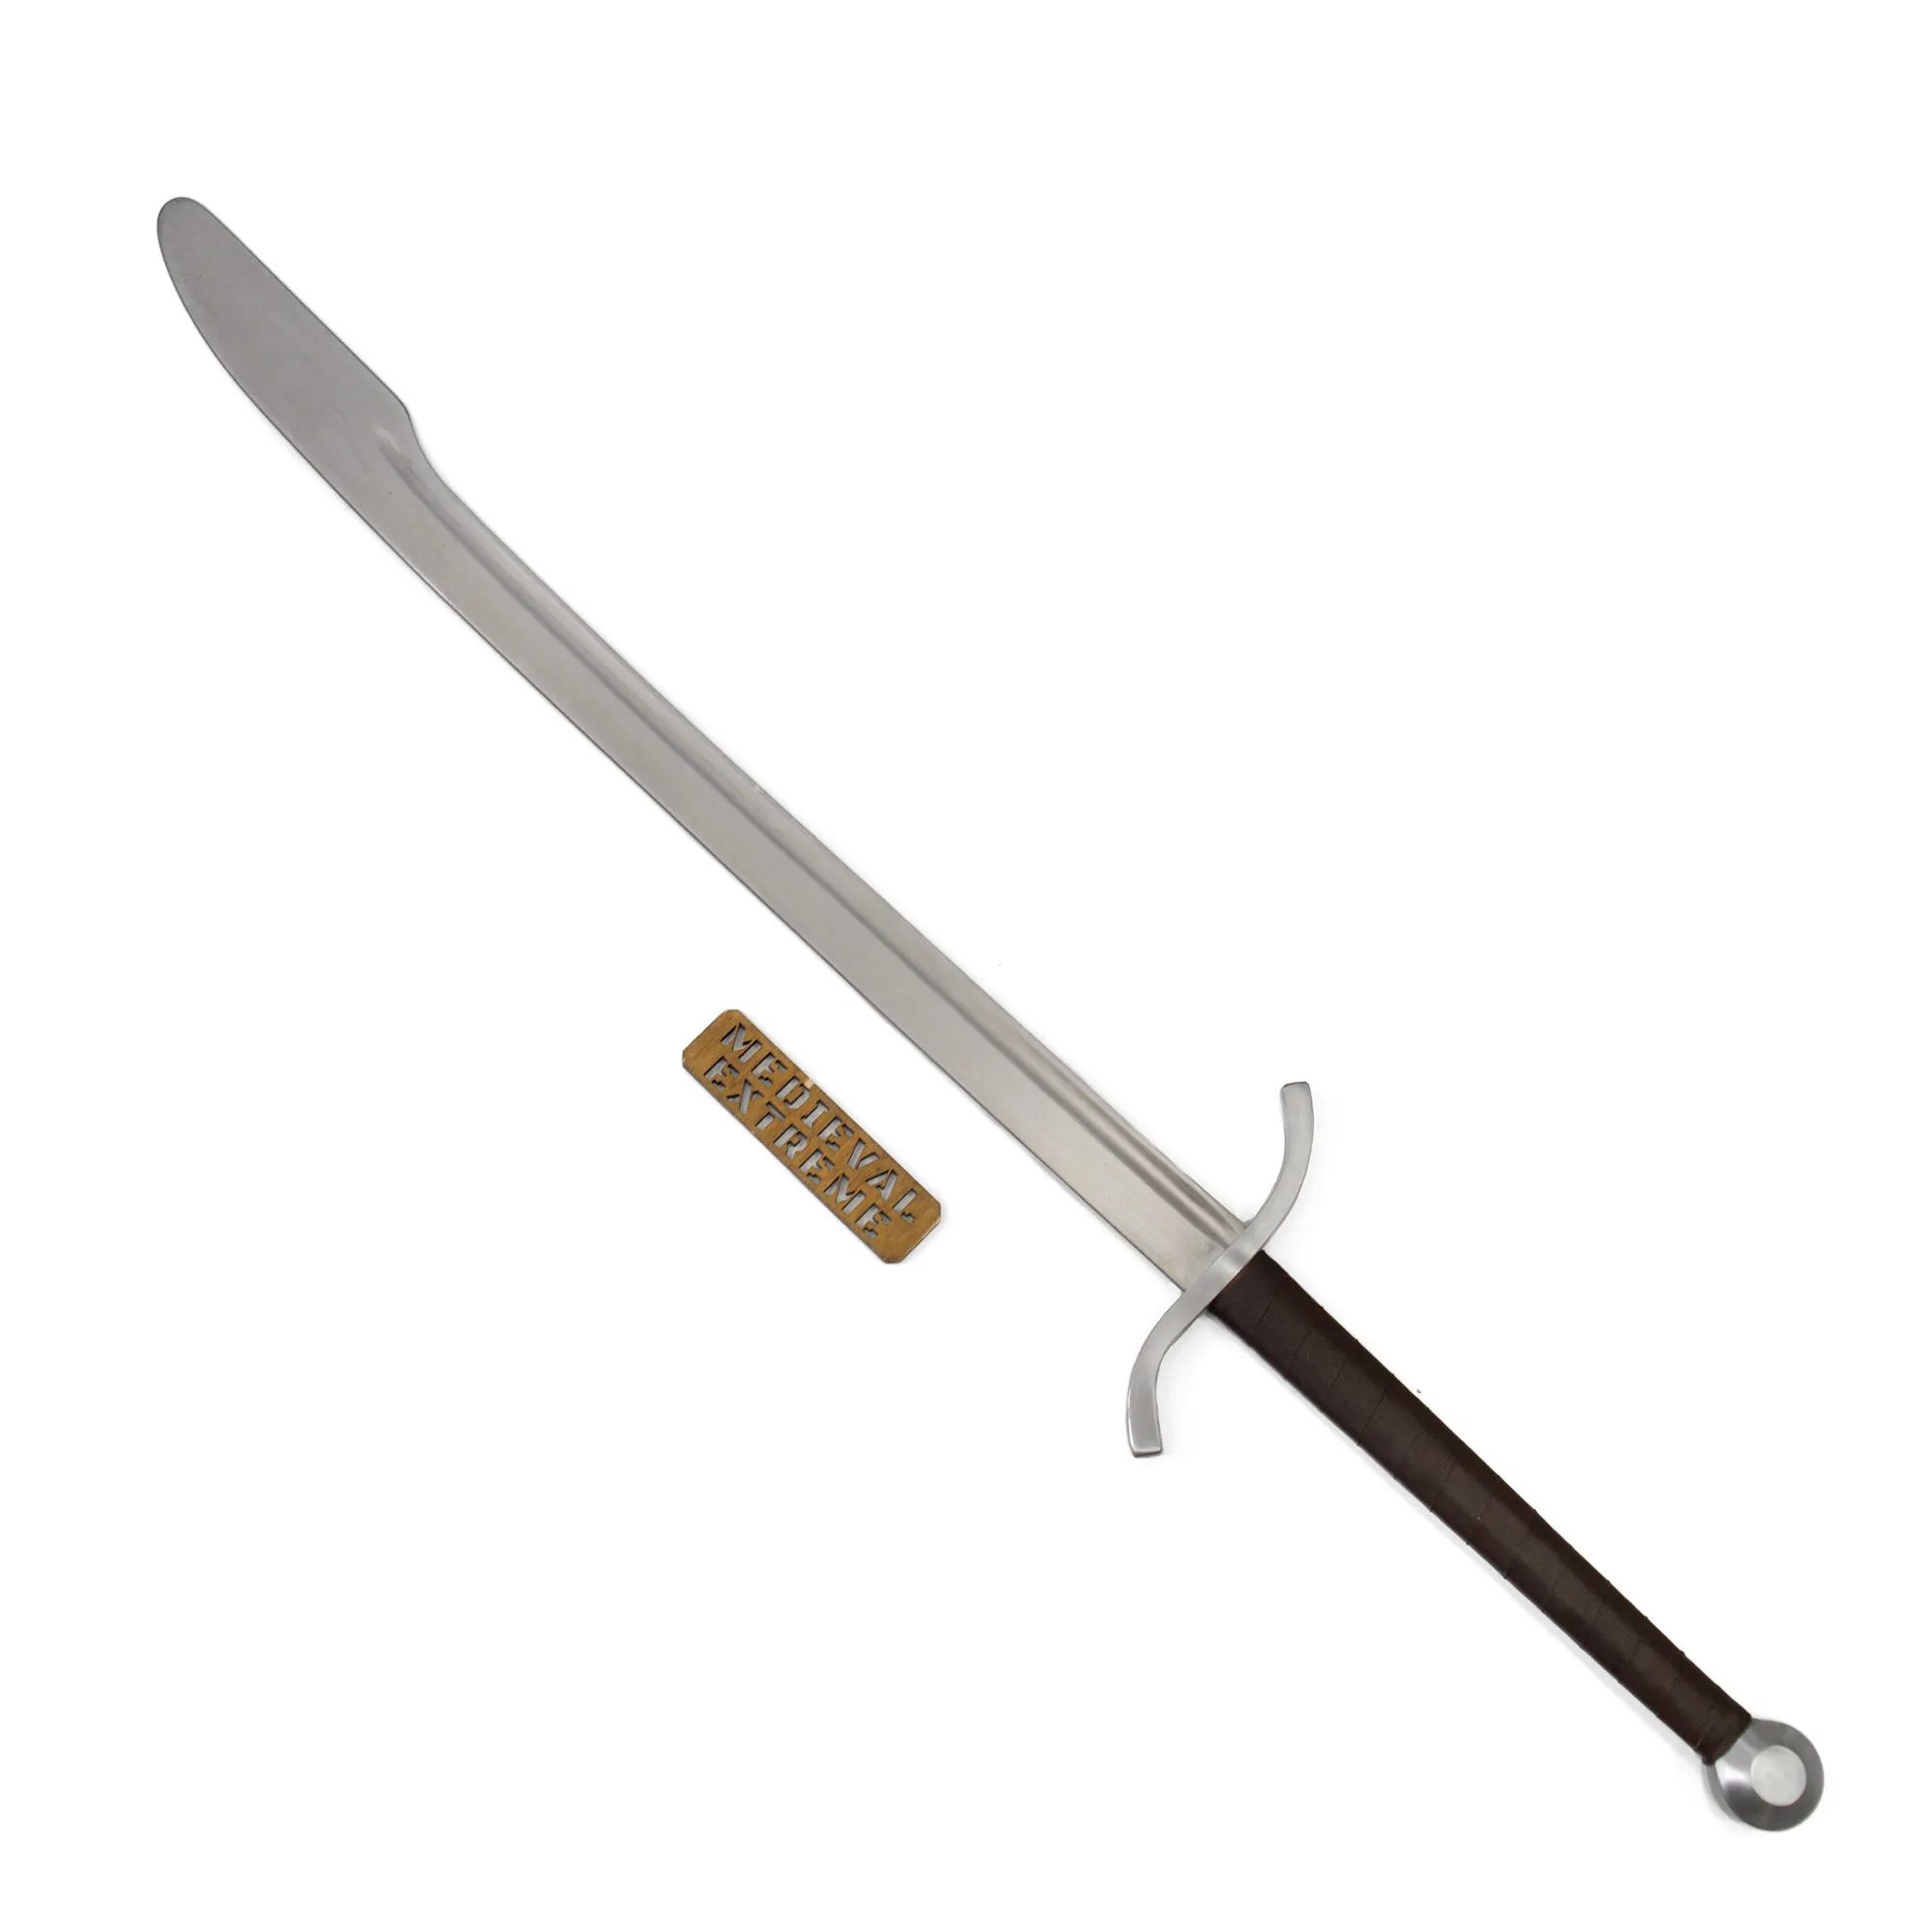 Two-handed falchion "Law" full length